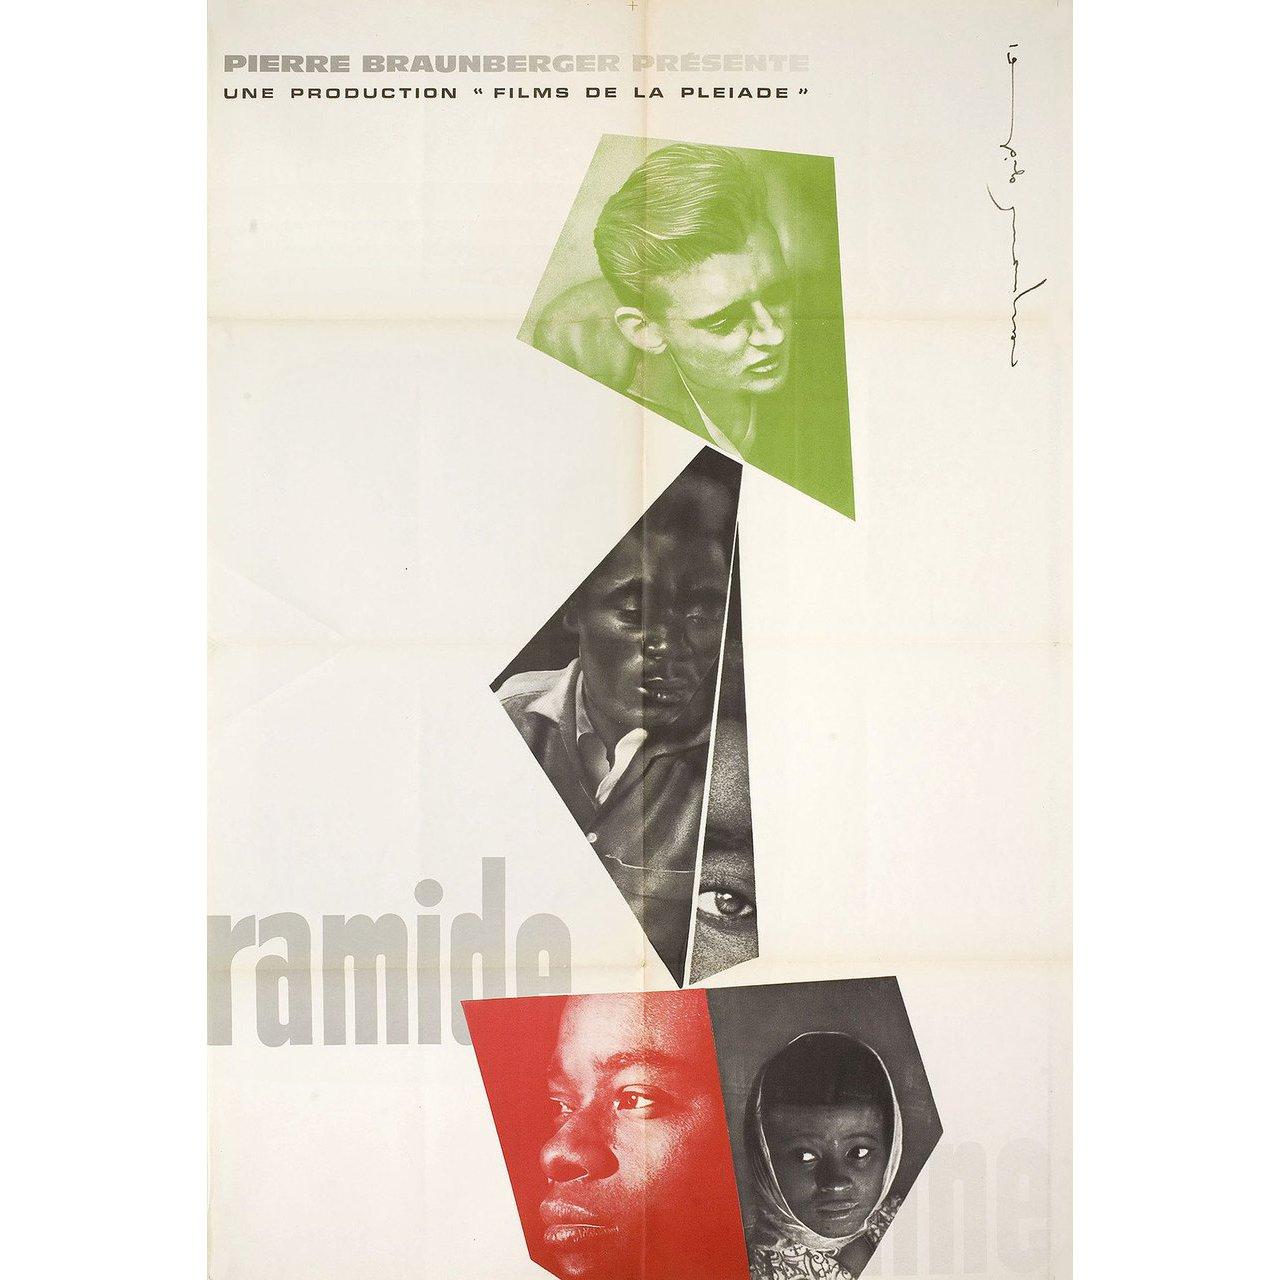 Original 1961 French half grande poster by Raymond Gid for the film The Human Pyramid (La pyramide humaine) directed by Jean Rouch with Denise / Elola / Jean-Claude / Nadine. Very good-fine condition, folded. Many original posters were issued folded